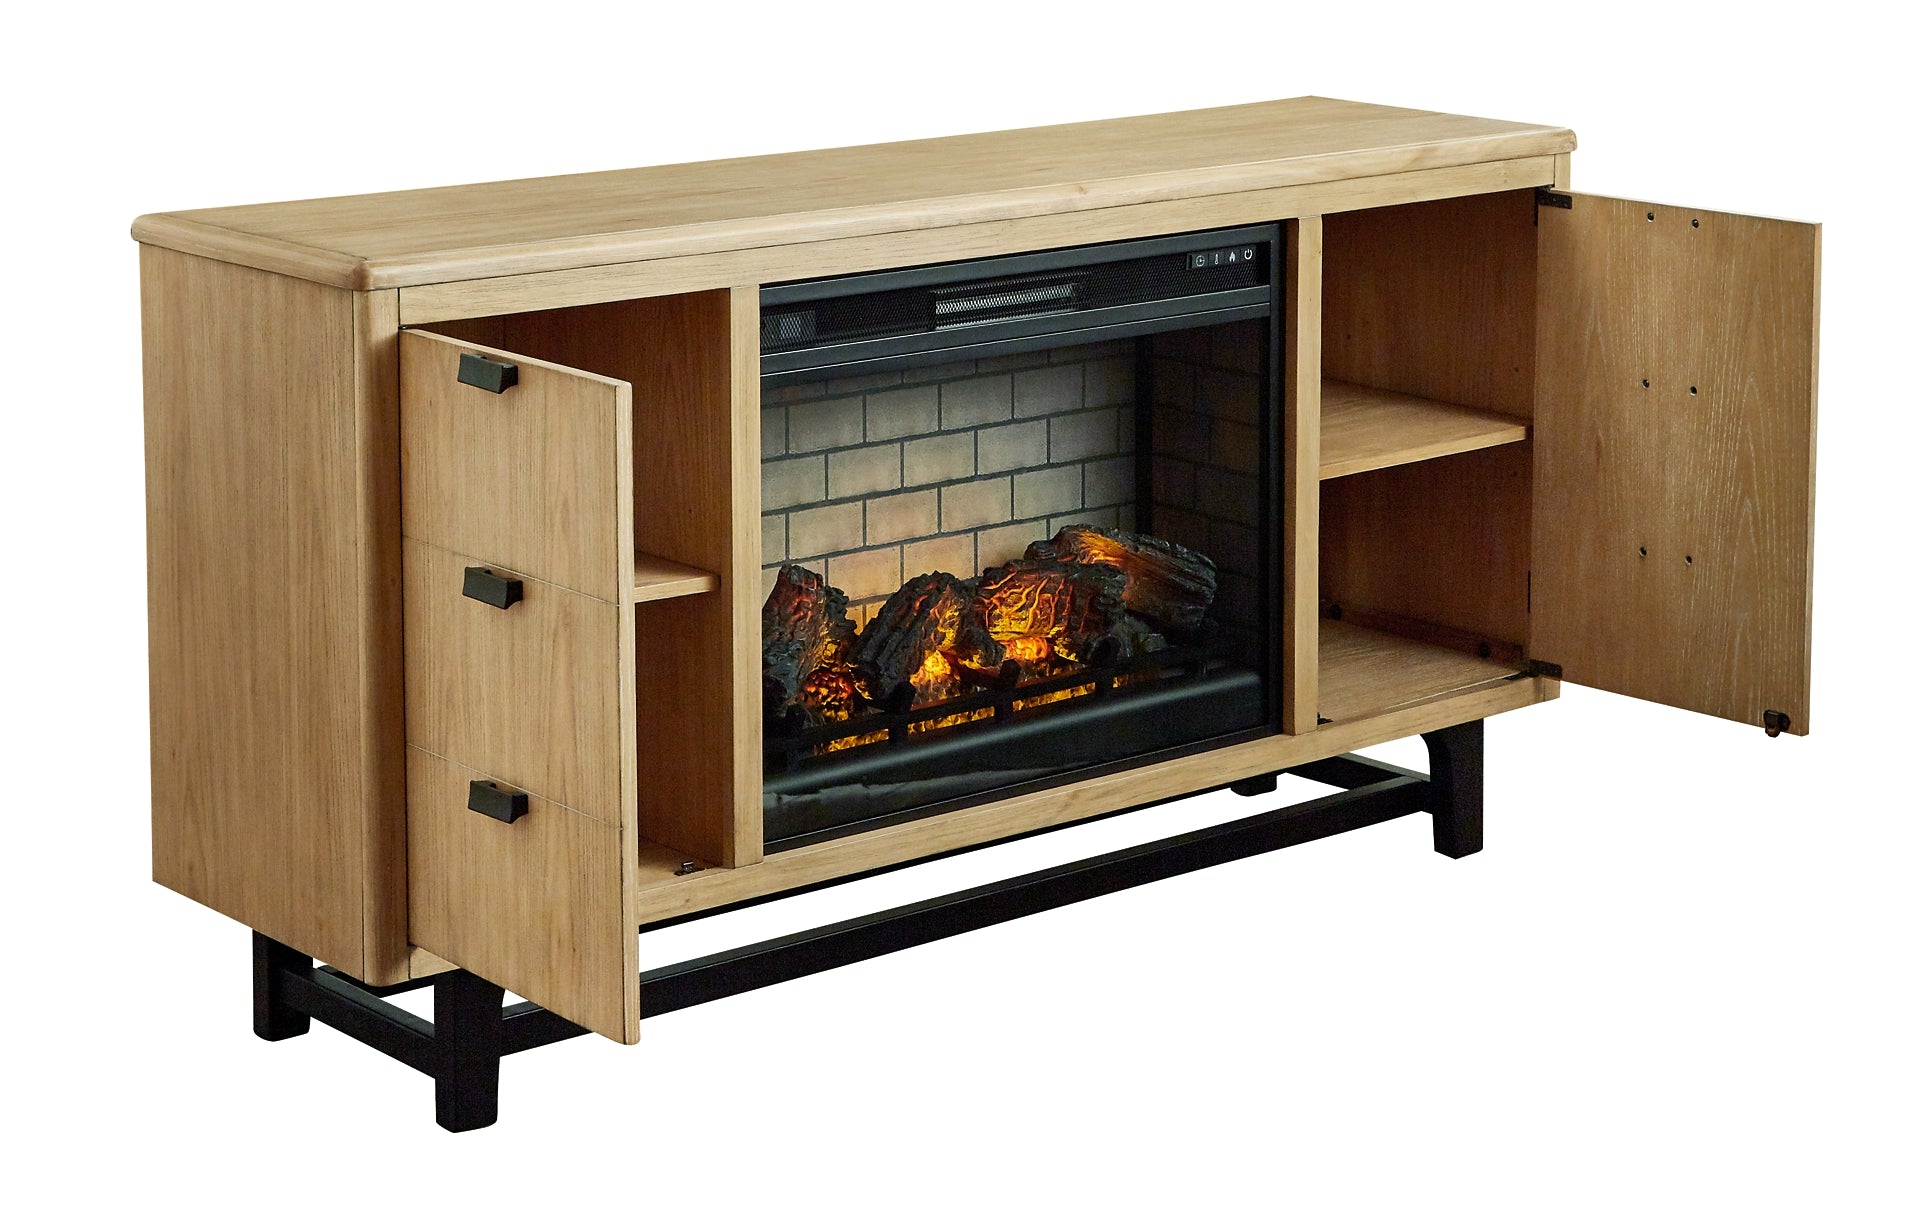 Ashley Express - Freslowe TV Stand with Electric Fireplace Wilson Furniture (OH)  in Bridgeport, Ohio. Serving Bridgeport, Yorkville, Bellaire, & Avondale